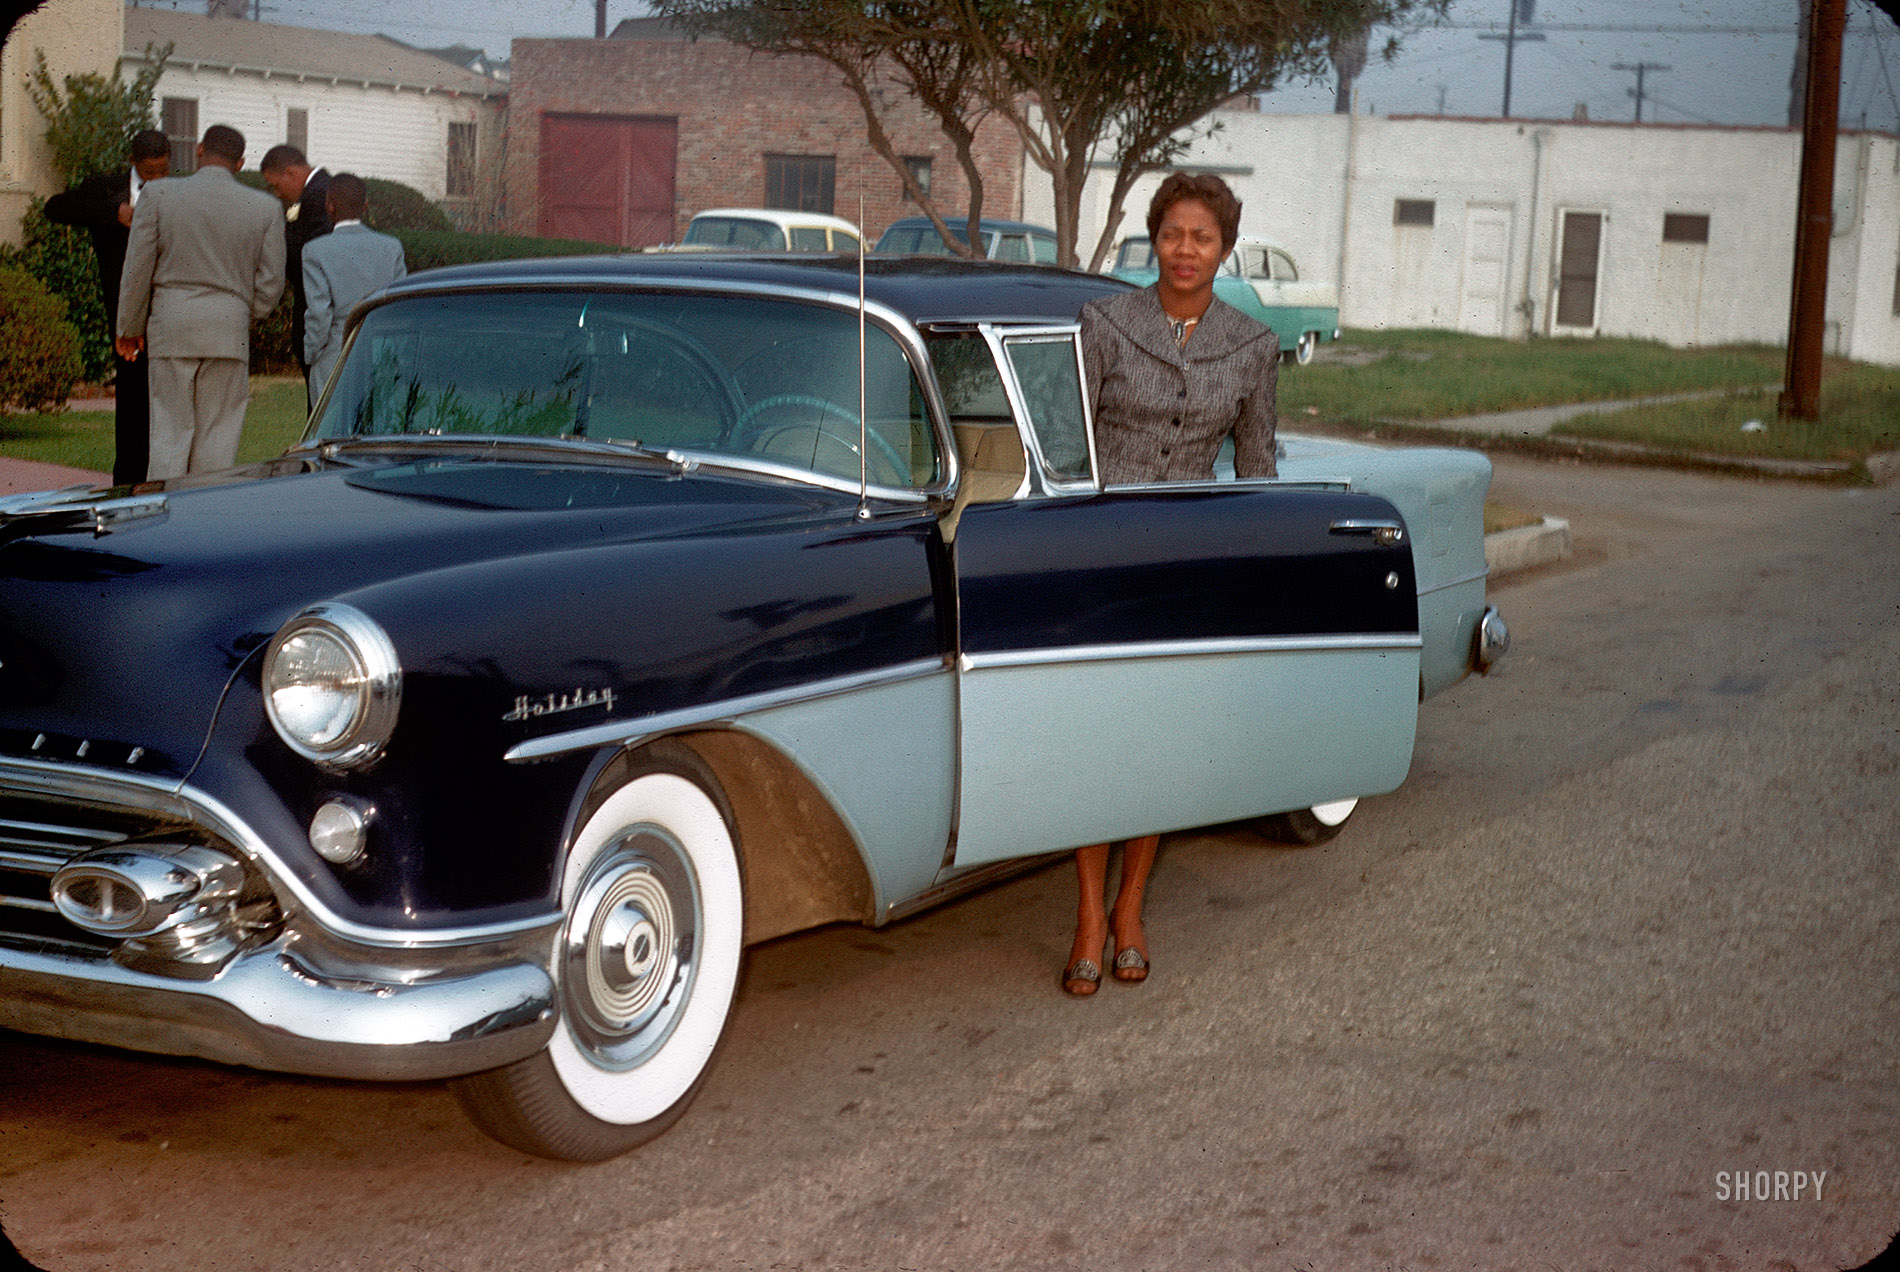 Somewhere in Southern California circa 1956. The car is a 1954 Oldsmobile. Another Kodachrome slide from my recent eBay find. View full size.